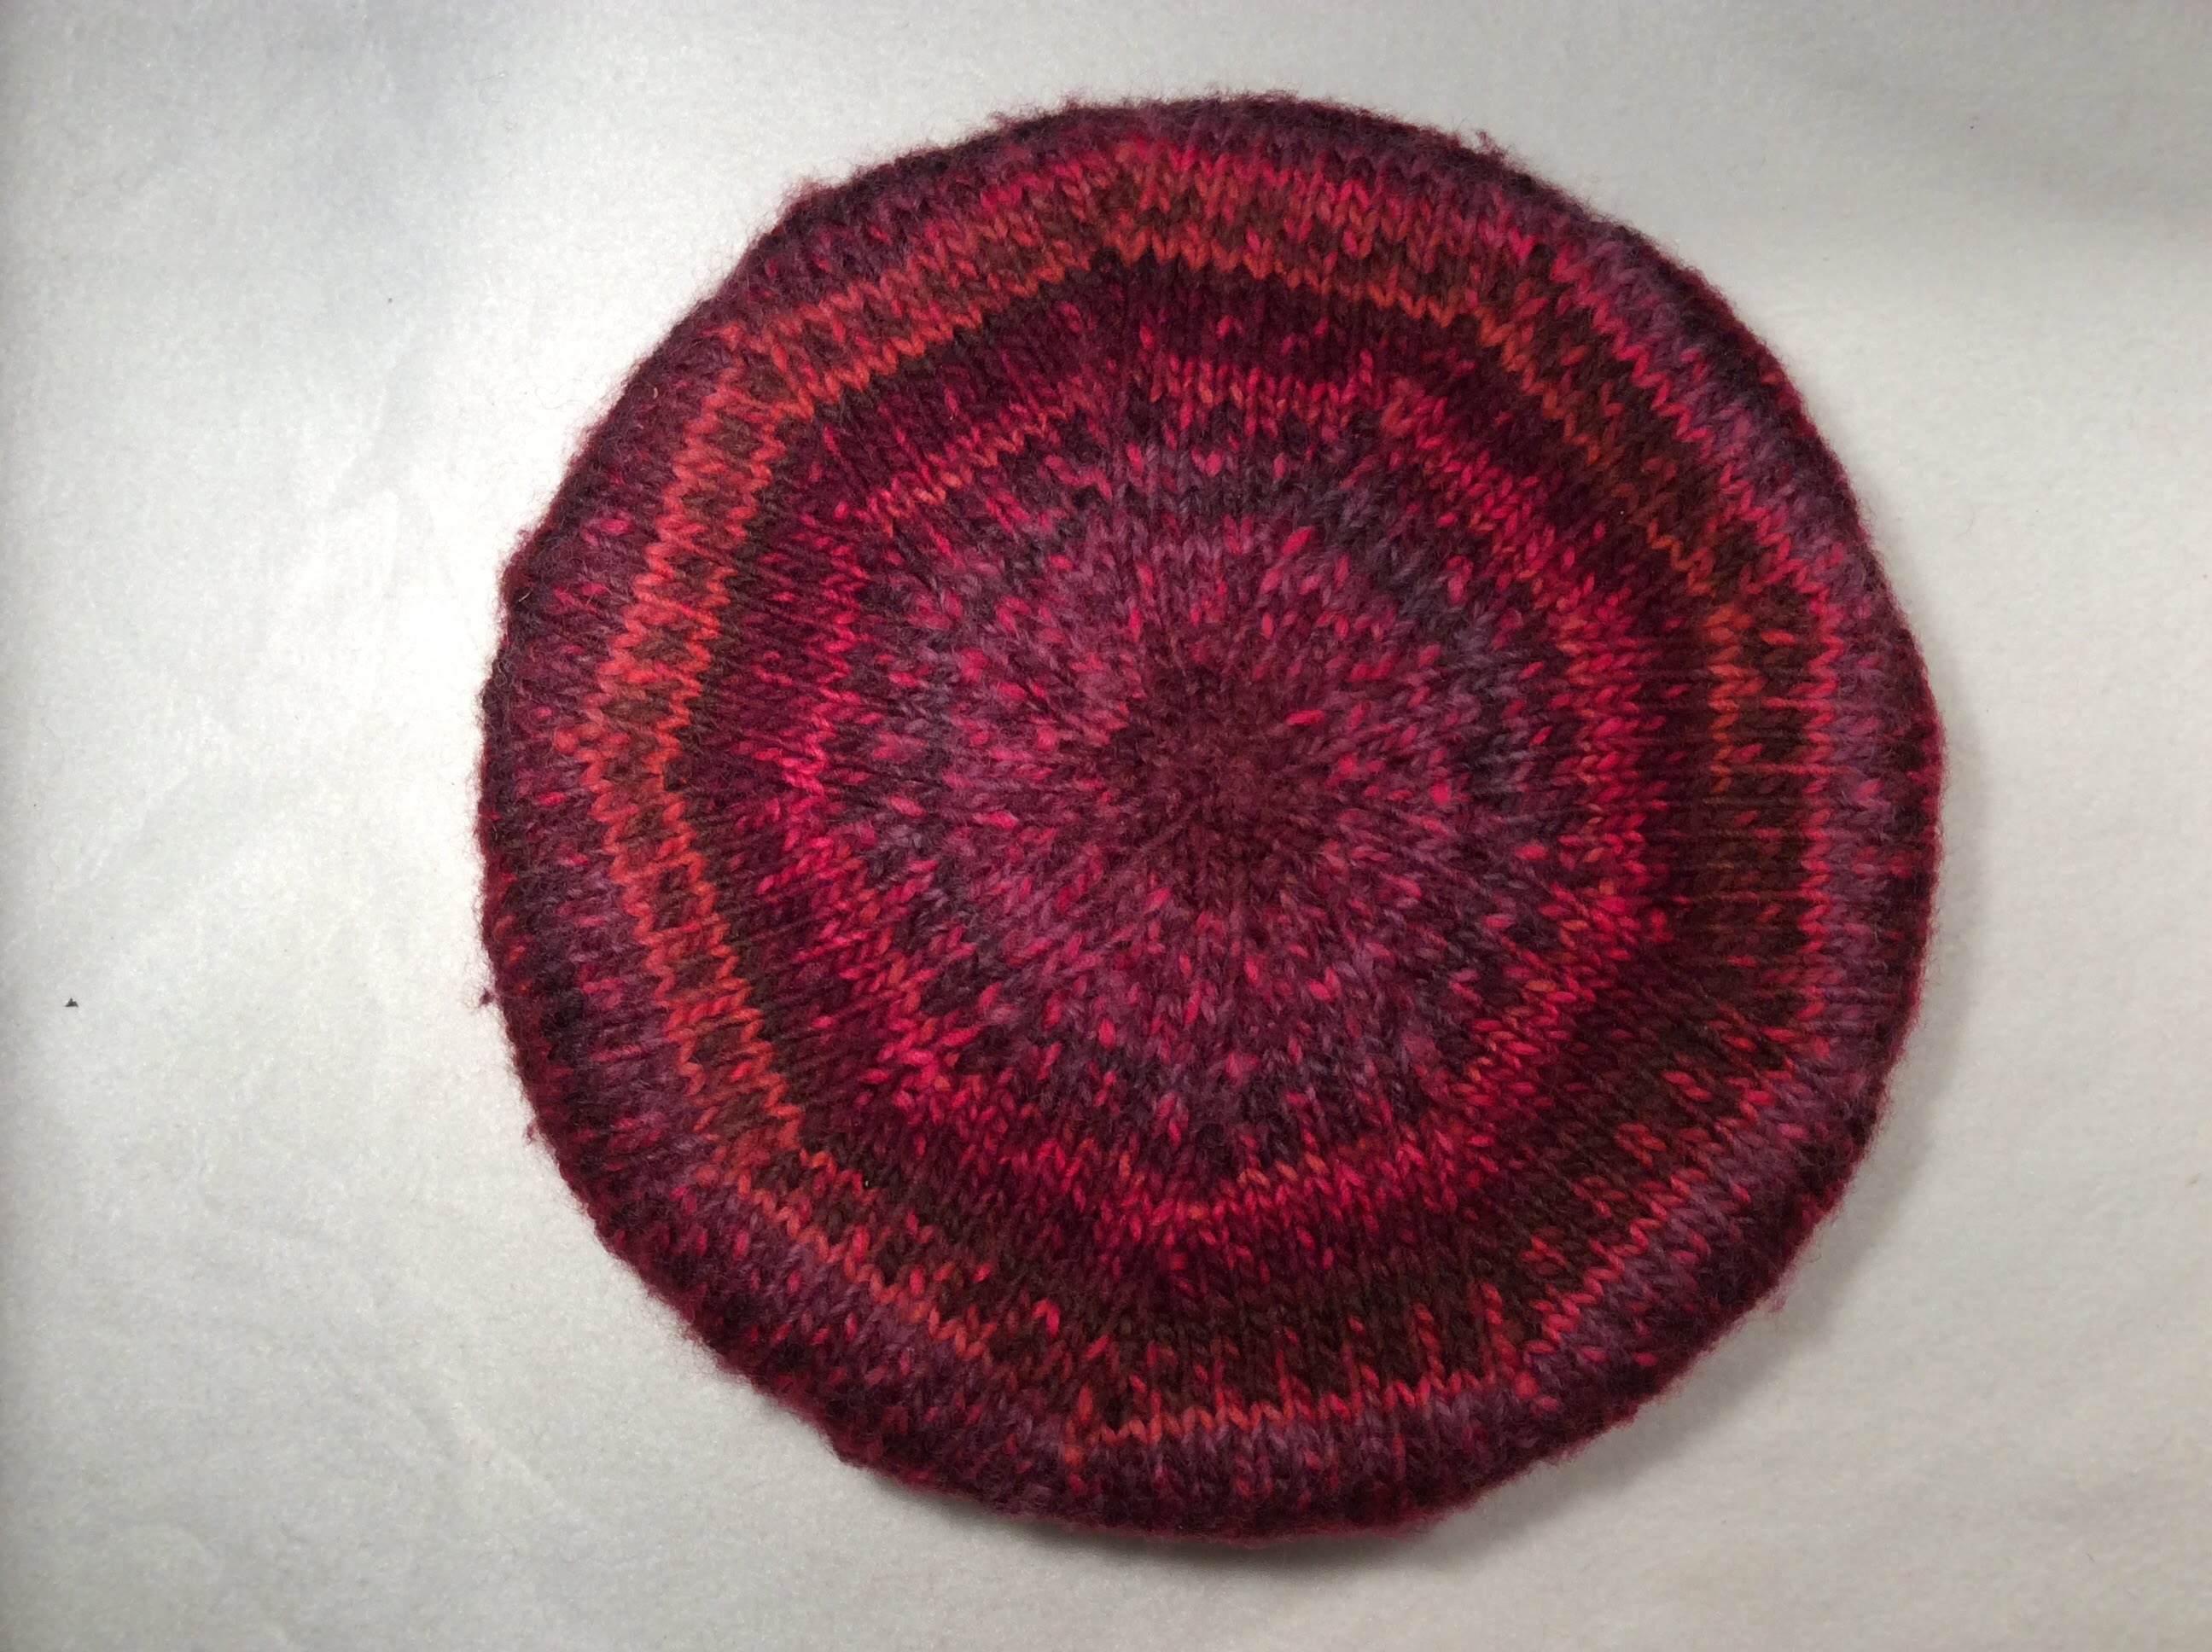 Knitting in the round how to knit a flat round circle - youtube msiaspx